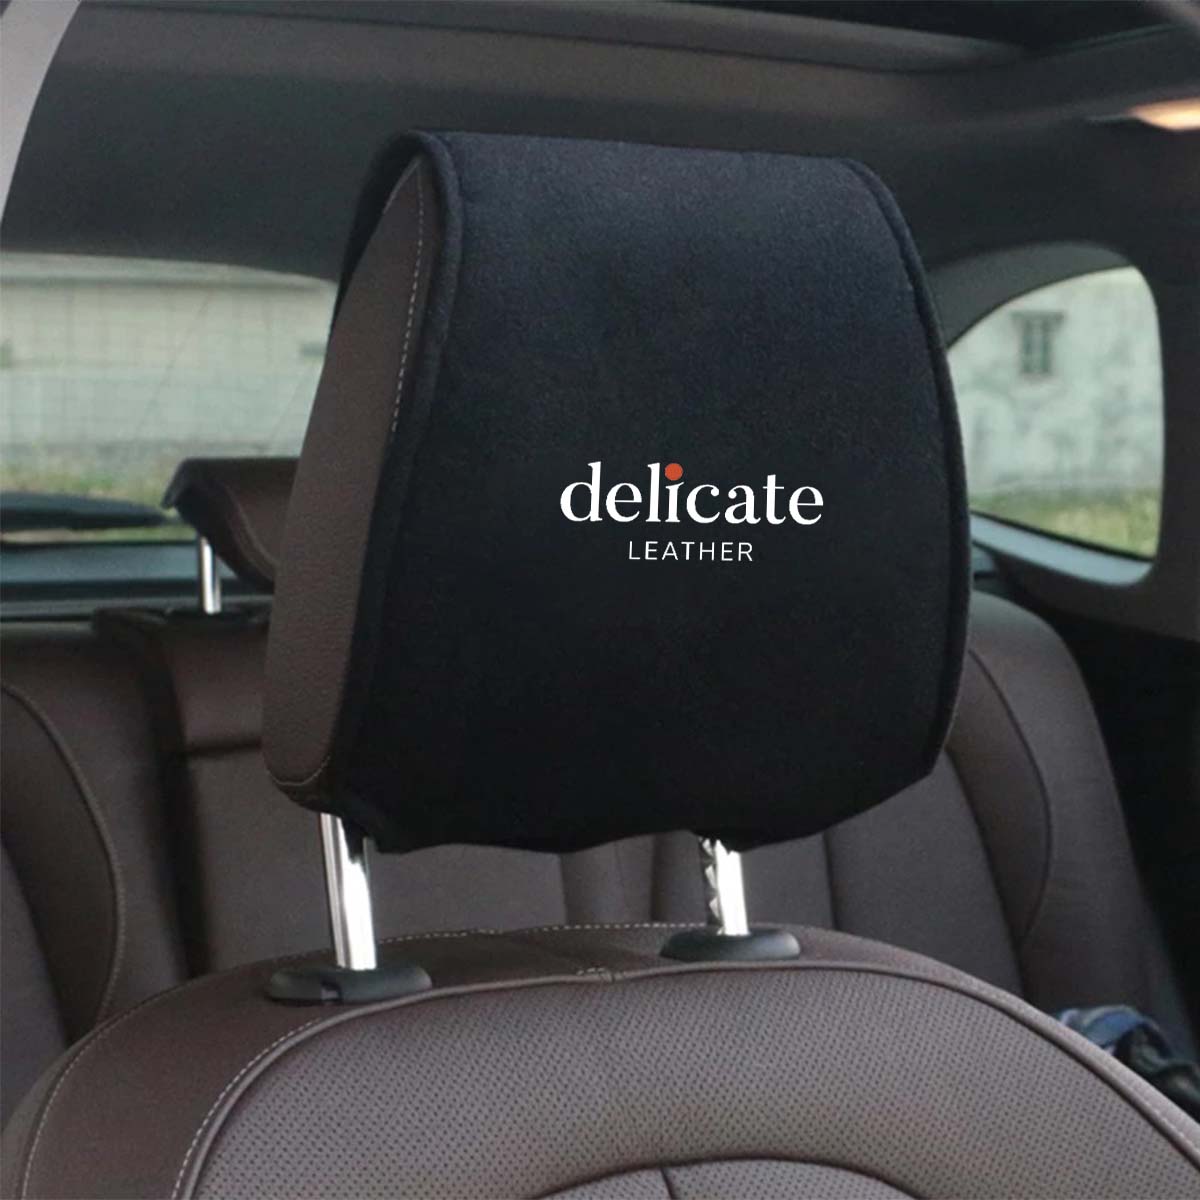 Ford Car Seat Headrest Cover: Stylish Protection for Your Vehicle's Headrests